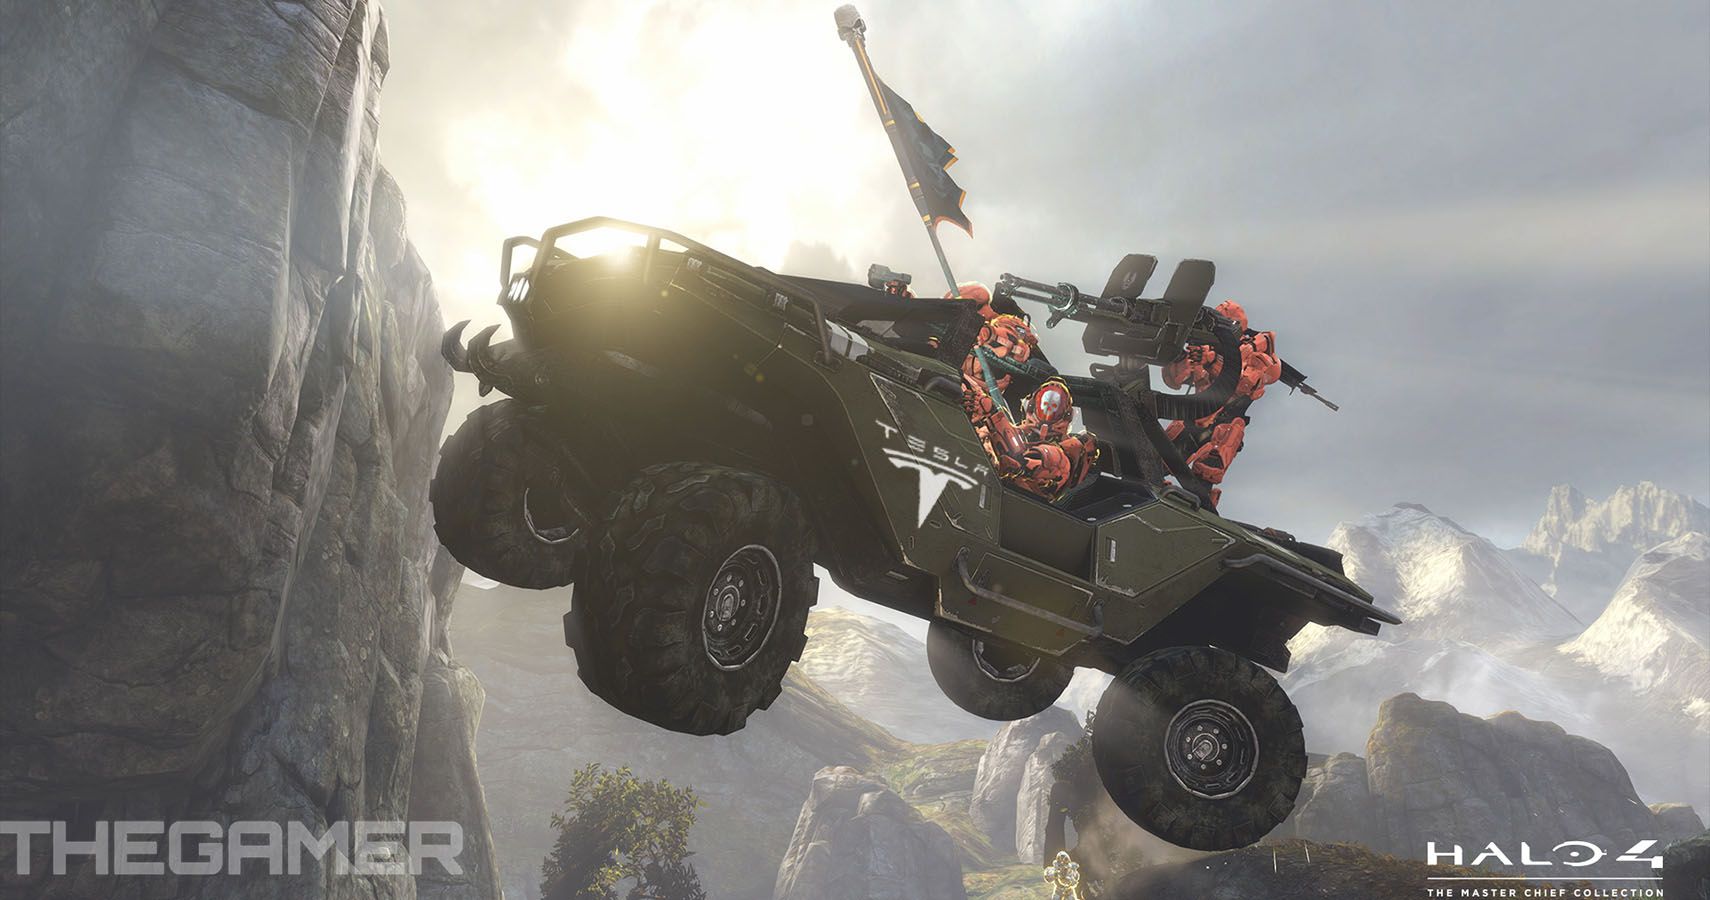 Official screenshot of a Warthog from the Halo 4 The Master Chief Collection from Microsoft with Tesla and The Gamer logos applied